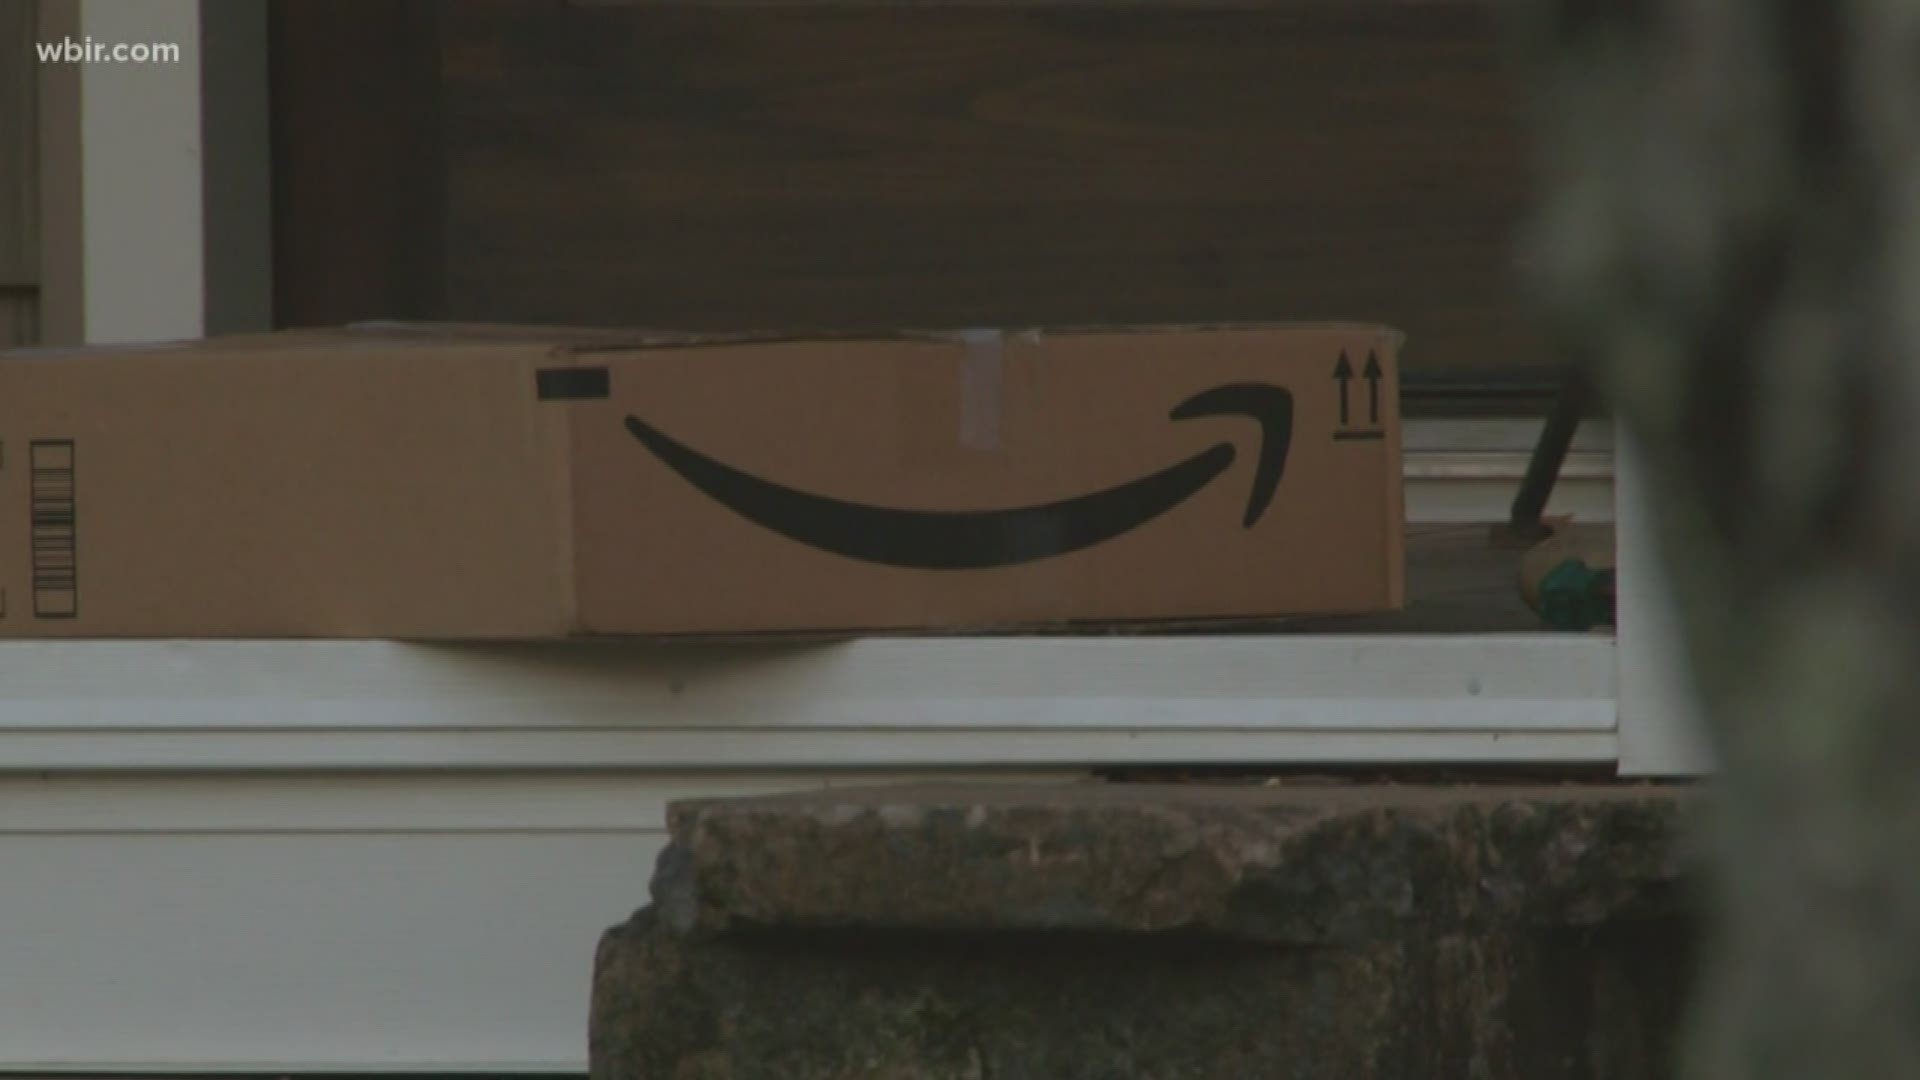 Holiday shopping season has begun and that means it's peak season for porch pirates.